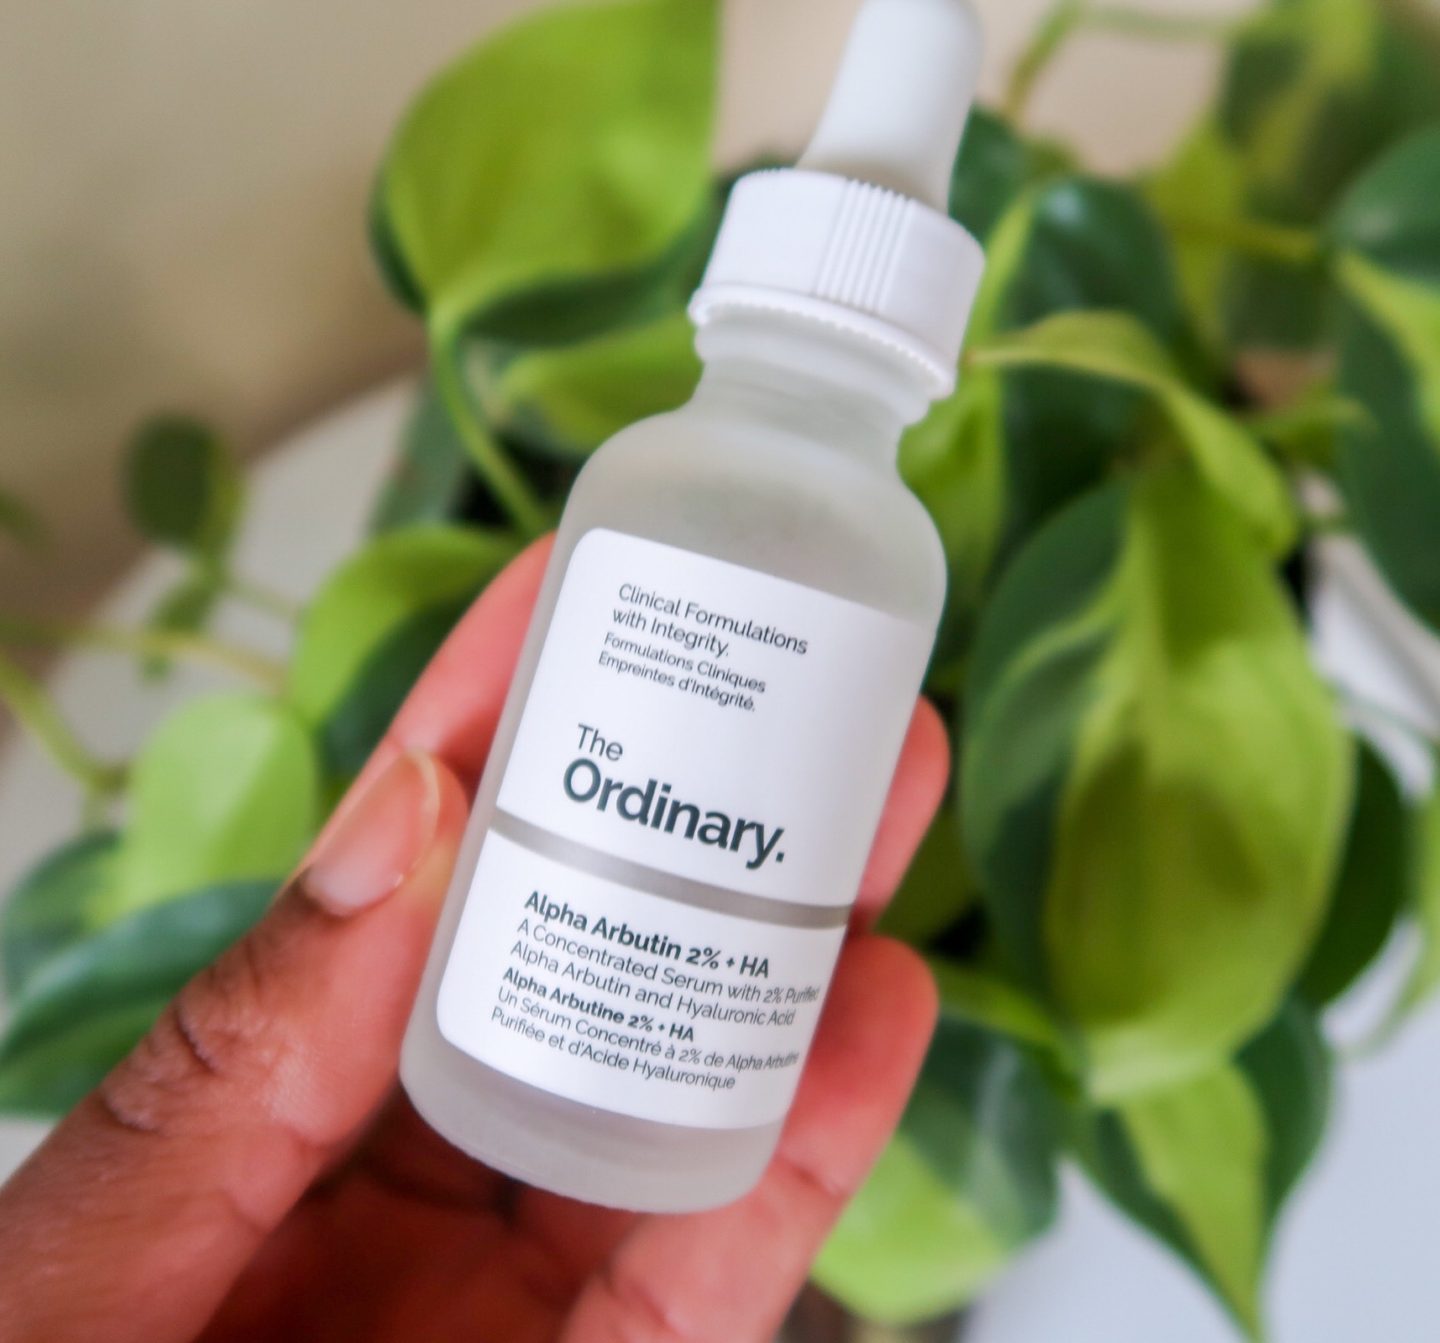 the ordinary 2% alpha arbutin and hyalurronic acid